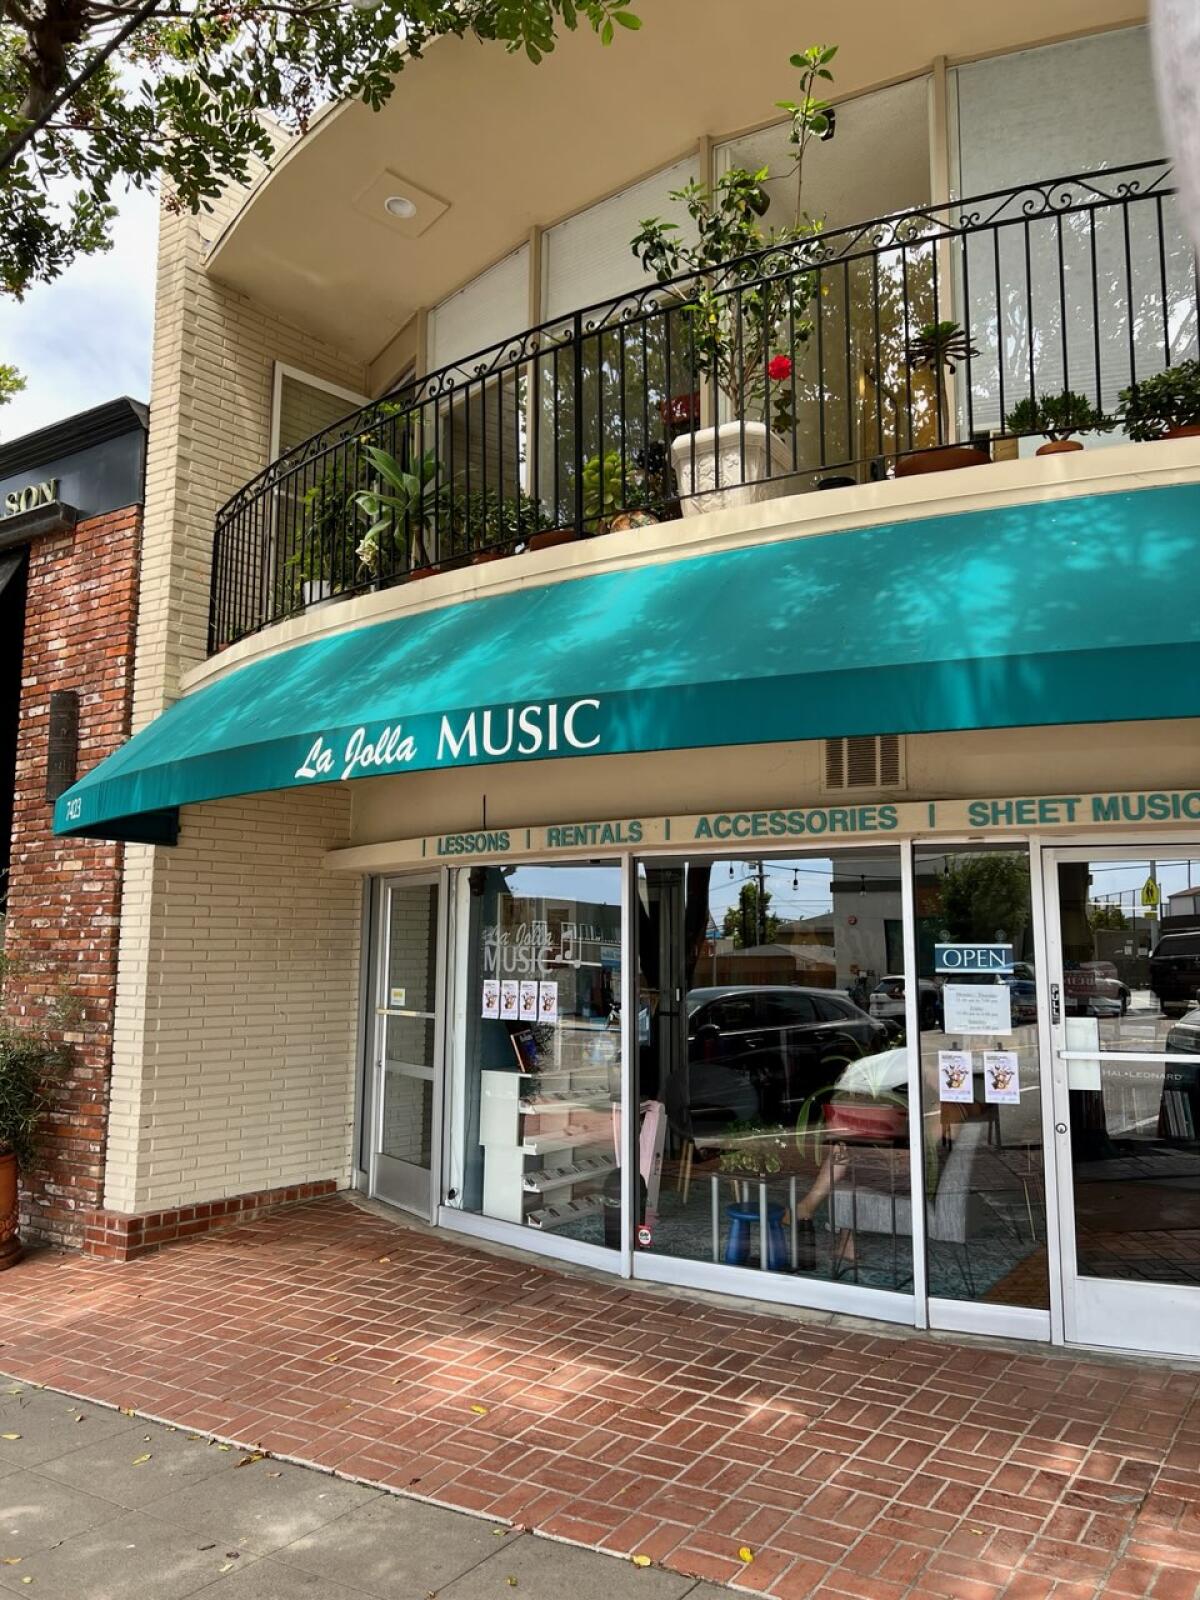 La Jolla Music at 7423 Girard Ave. offers private and group music lessons.